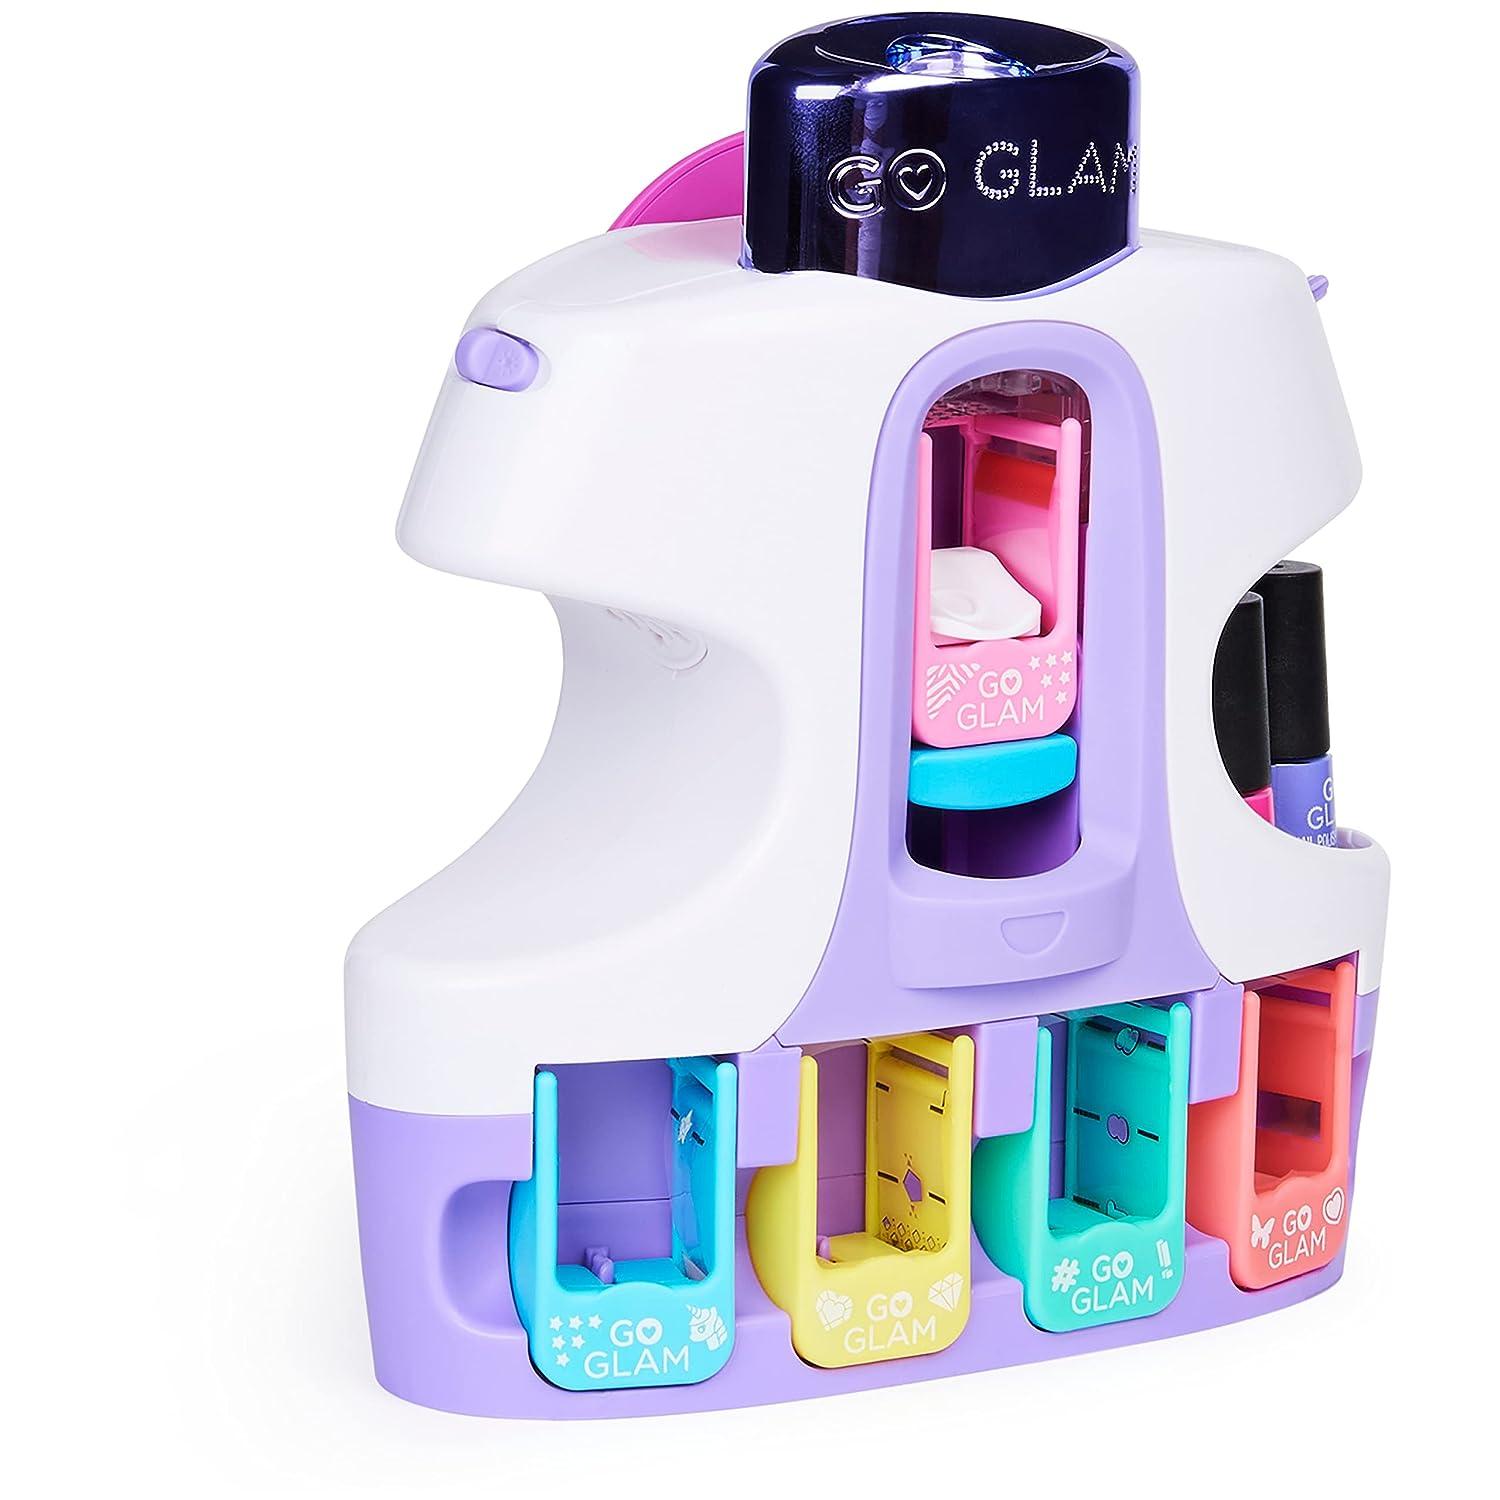 Cool Maker, GO GLAM U-nique Nail Salon with Portable Stamper, 5 Design Pods  and Dryer, Nail Kit Kids Toys for Ages 8 and up